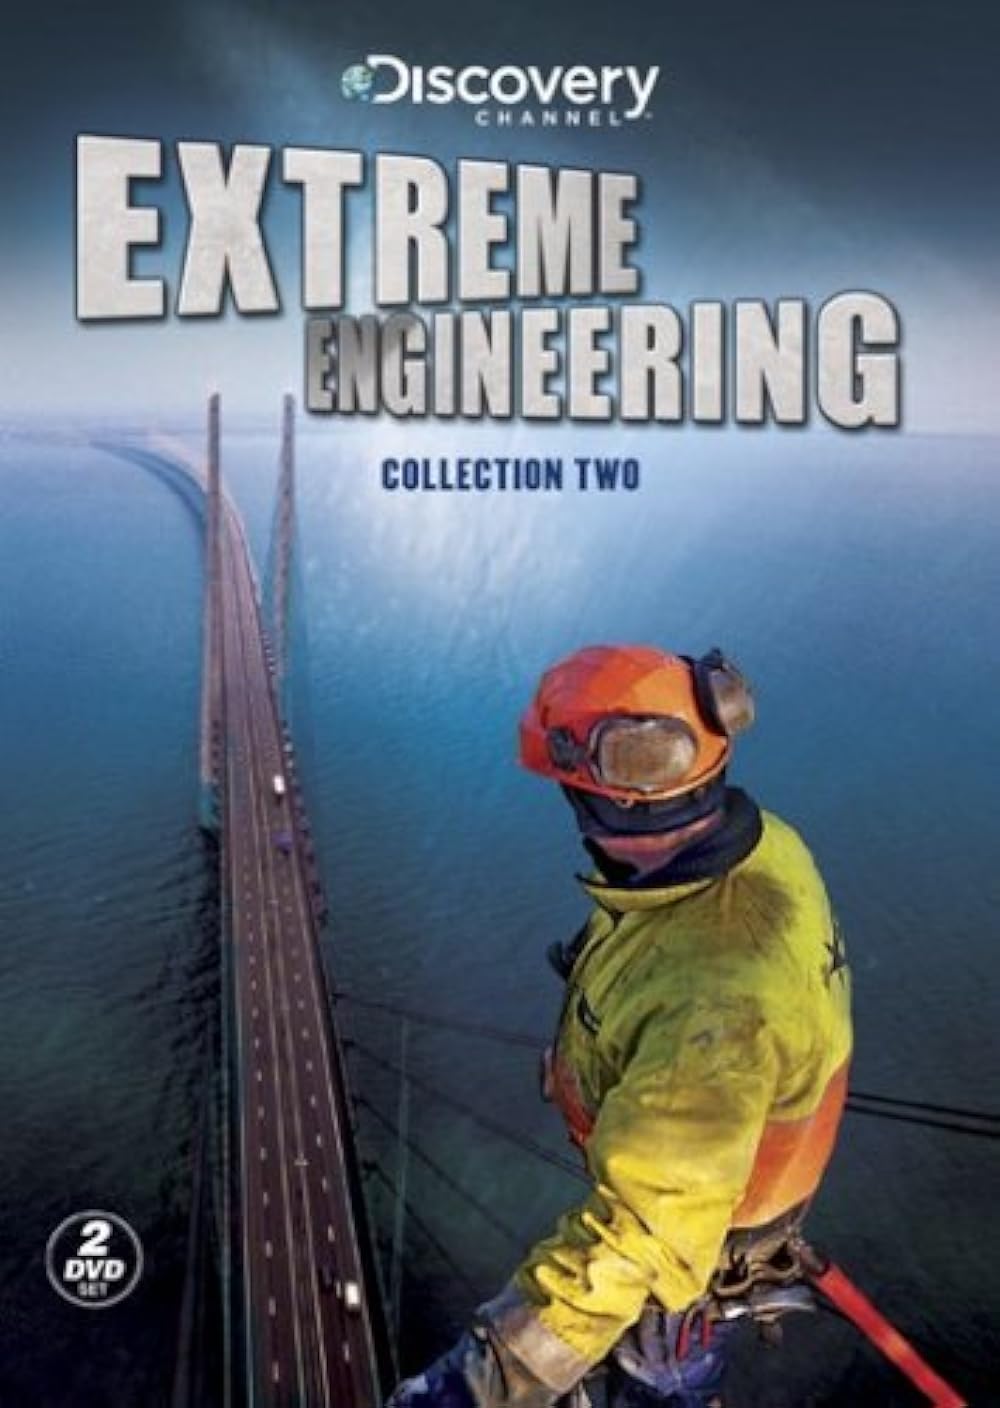 Discovery Extreme Engineering